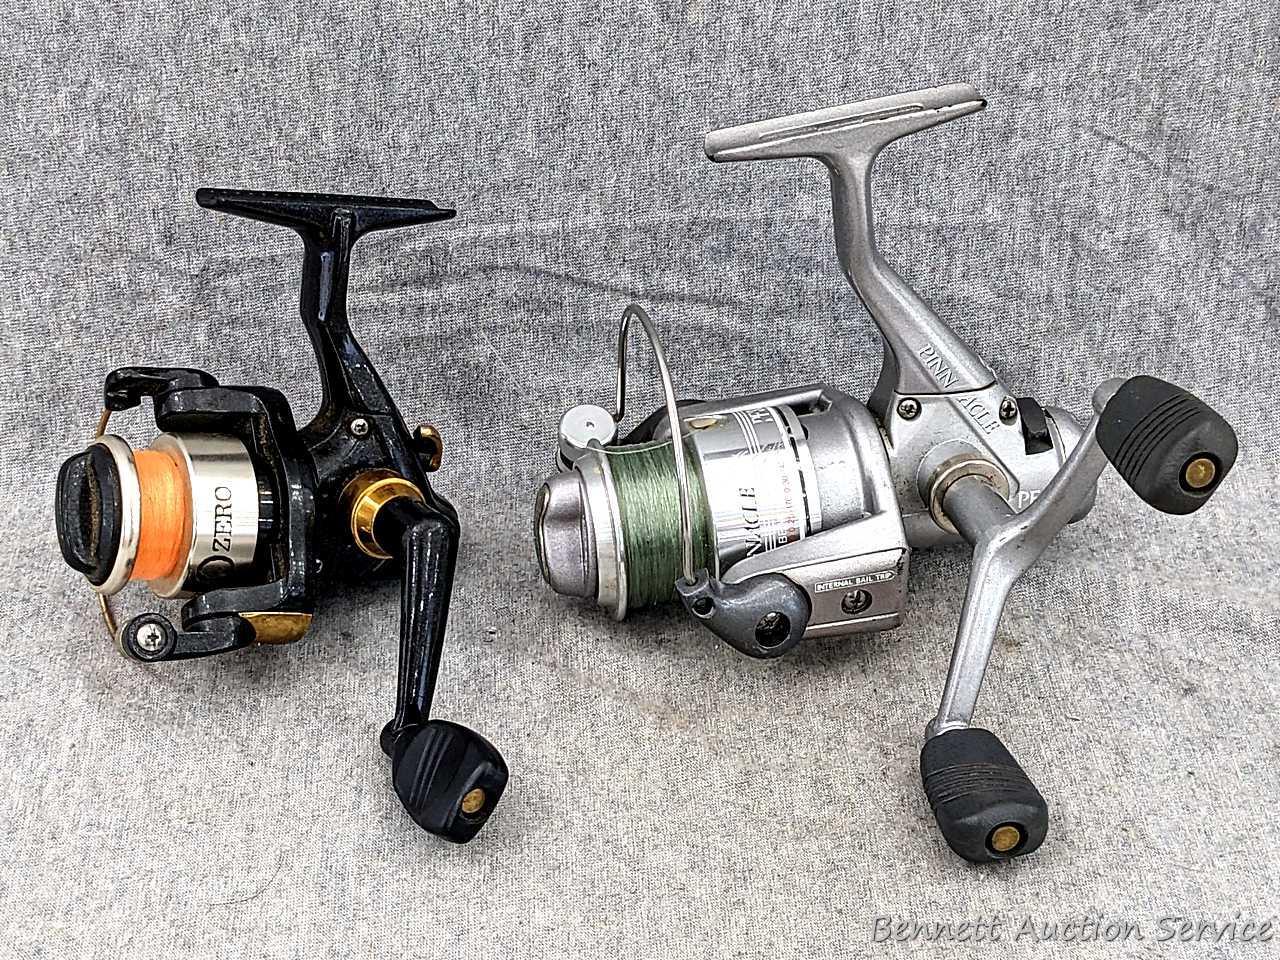 South Bend sub0zero spinning reel and a Pinnacle